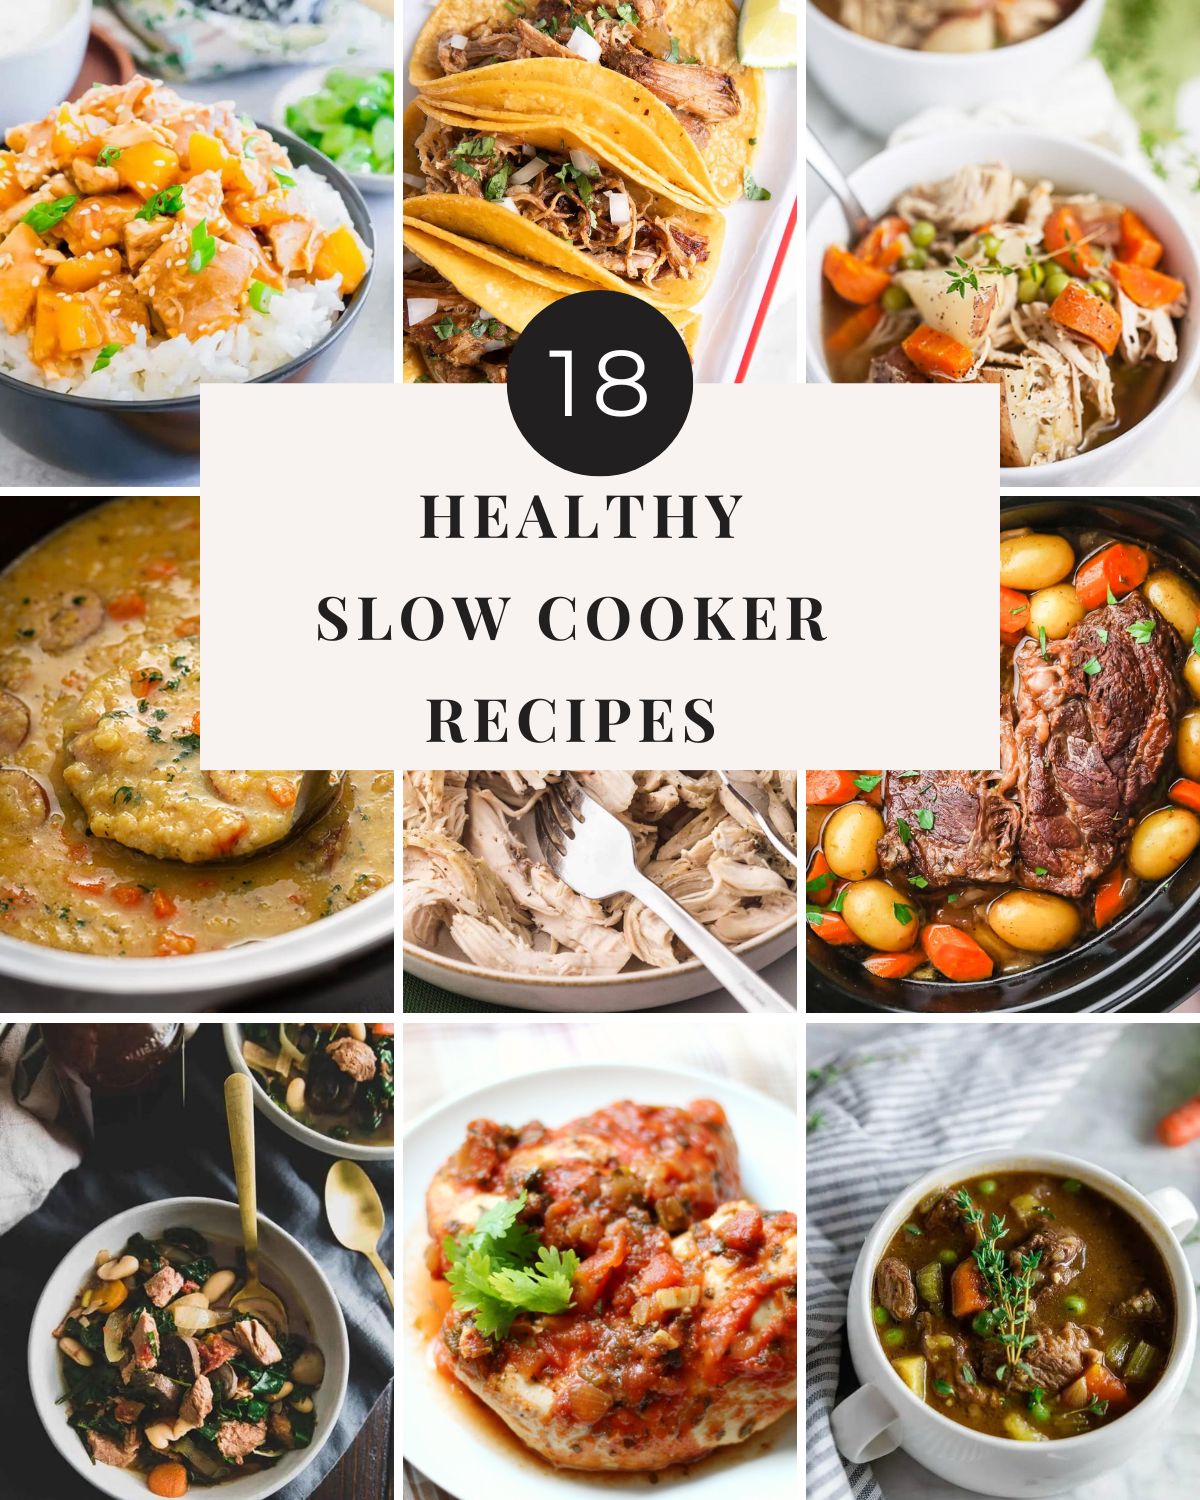 Collage of slowcooker recipes with text overlay saying 18 healthy slowcooker recipes.